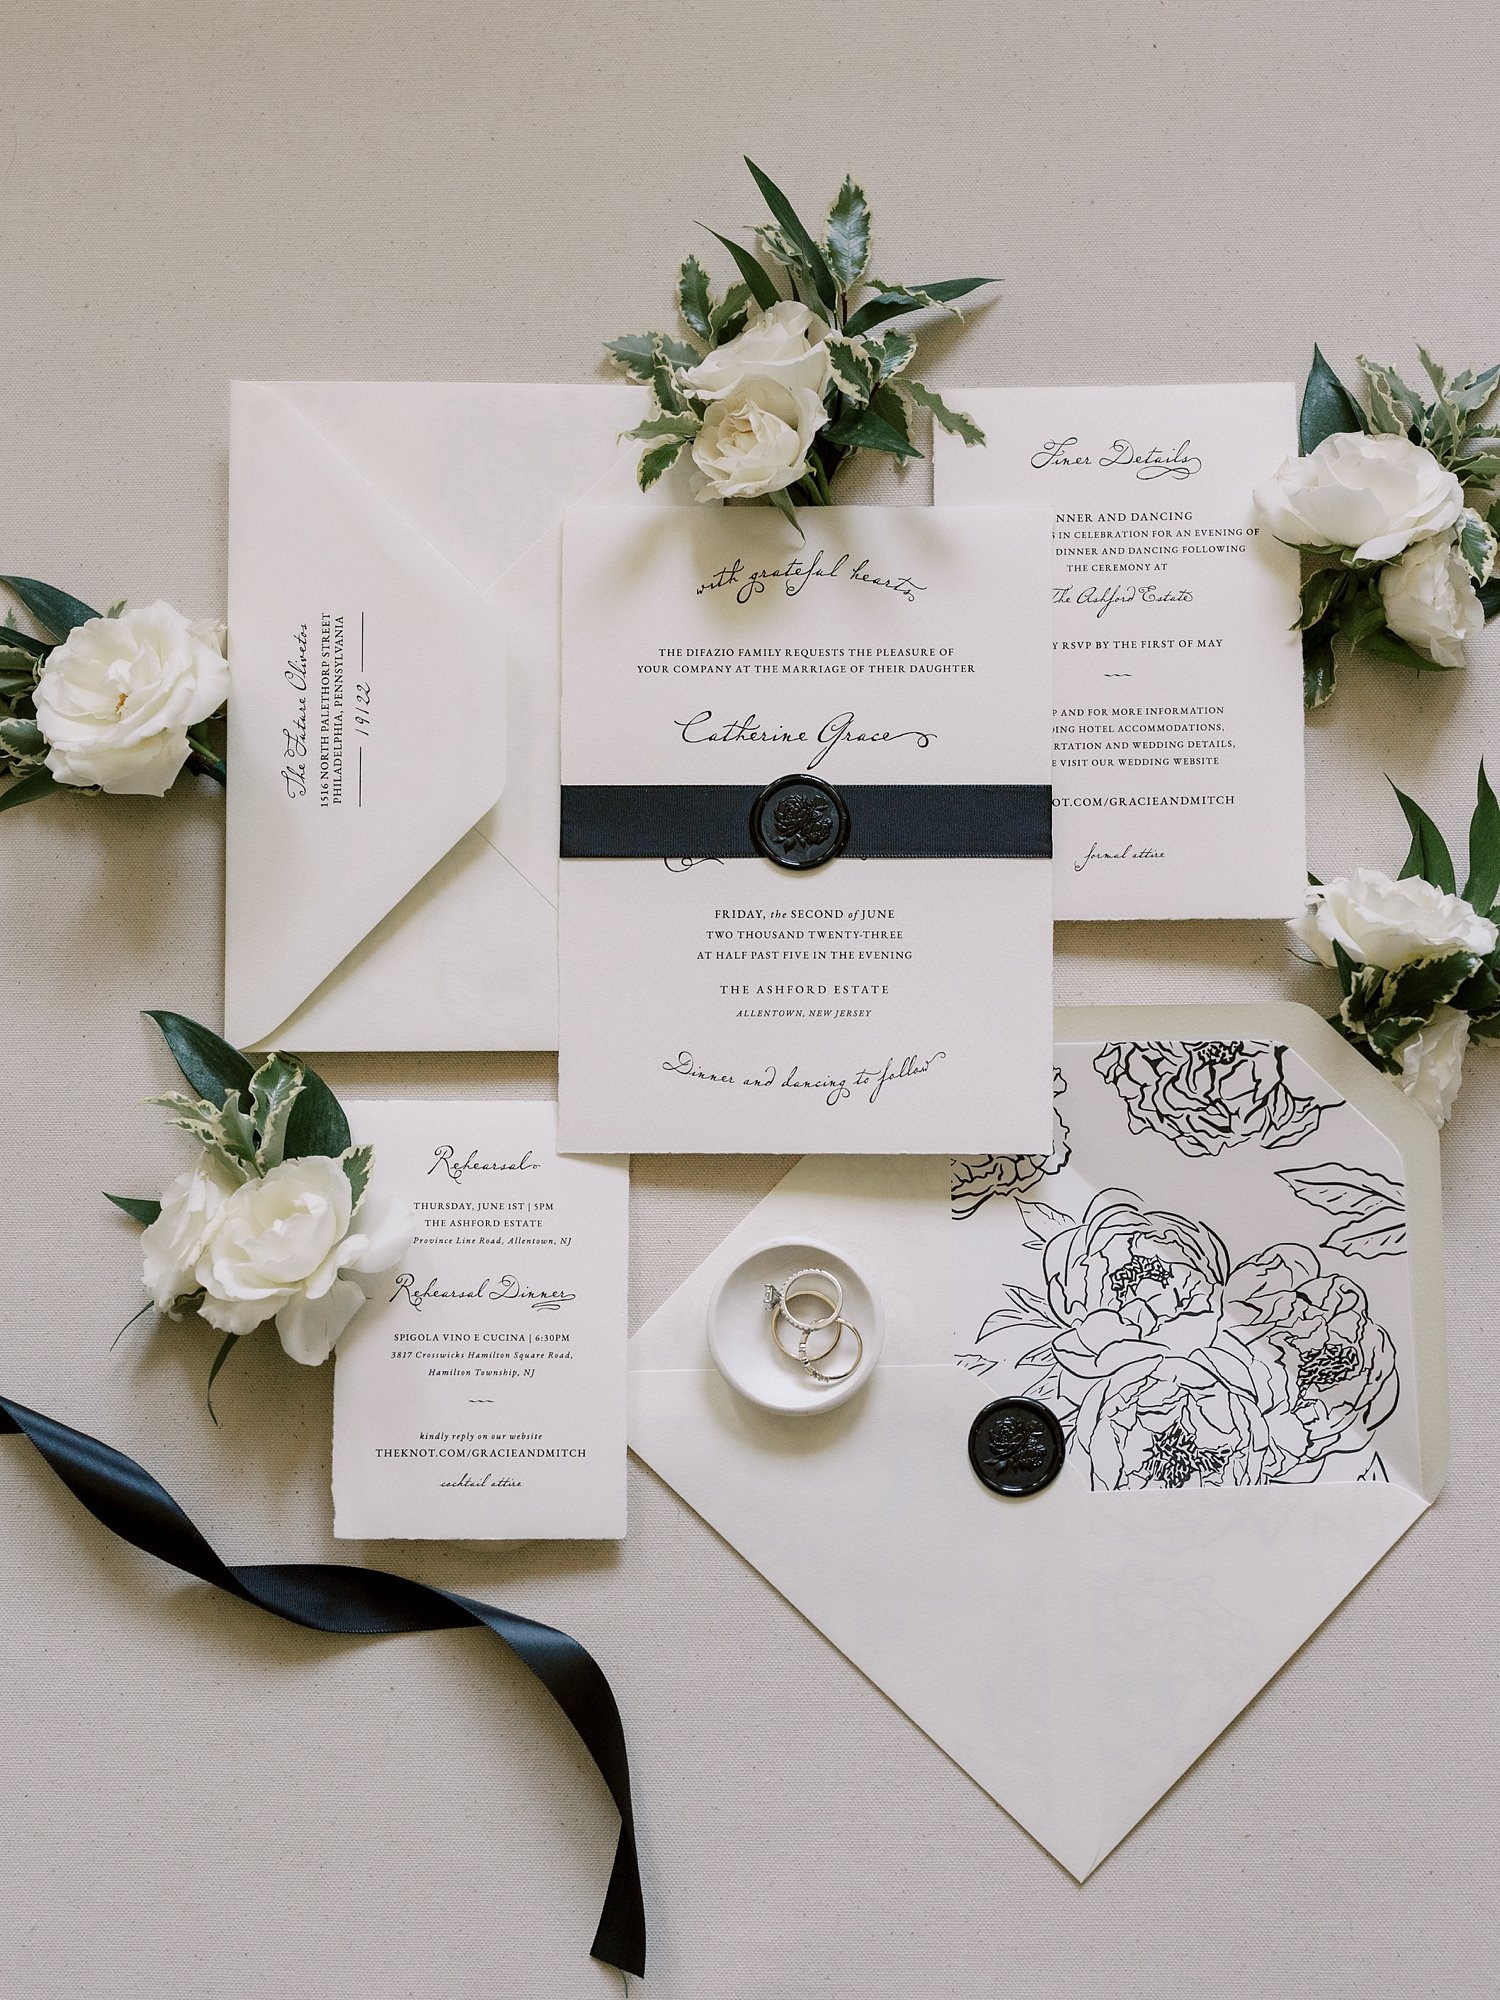 black and white stationery set with black ribbon and wax seal